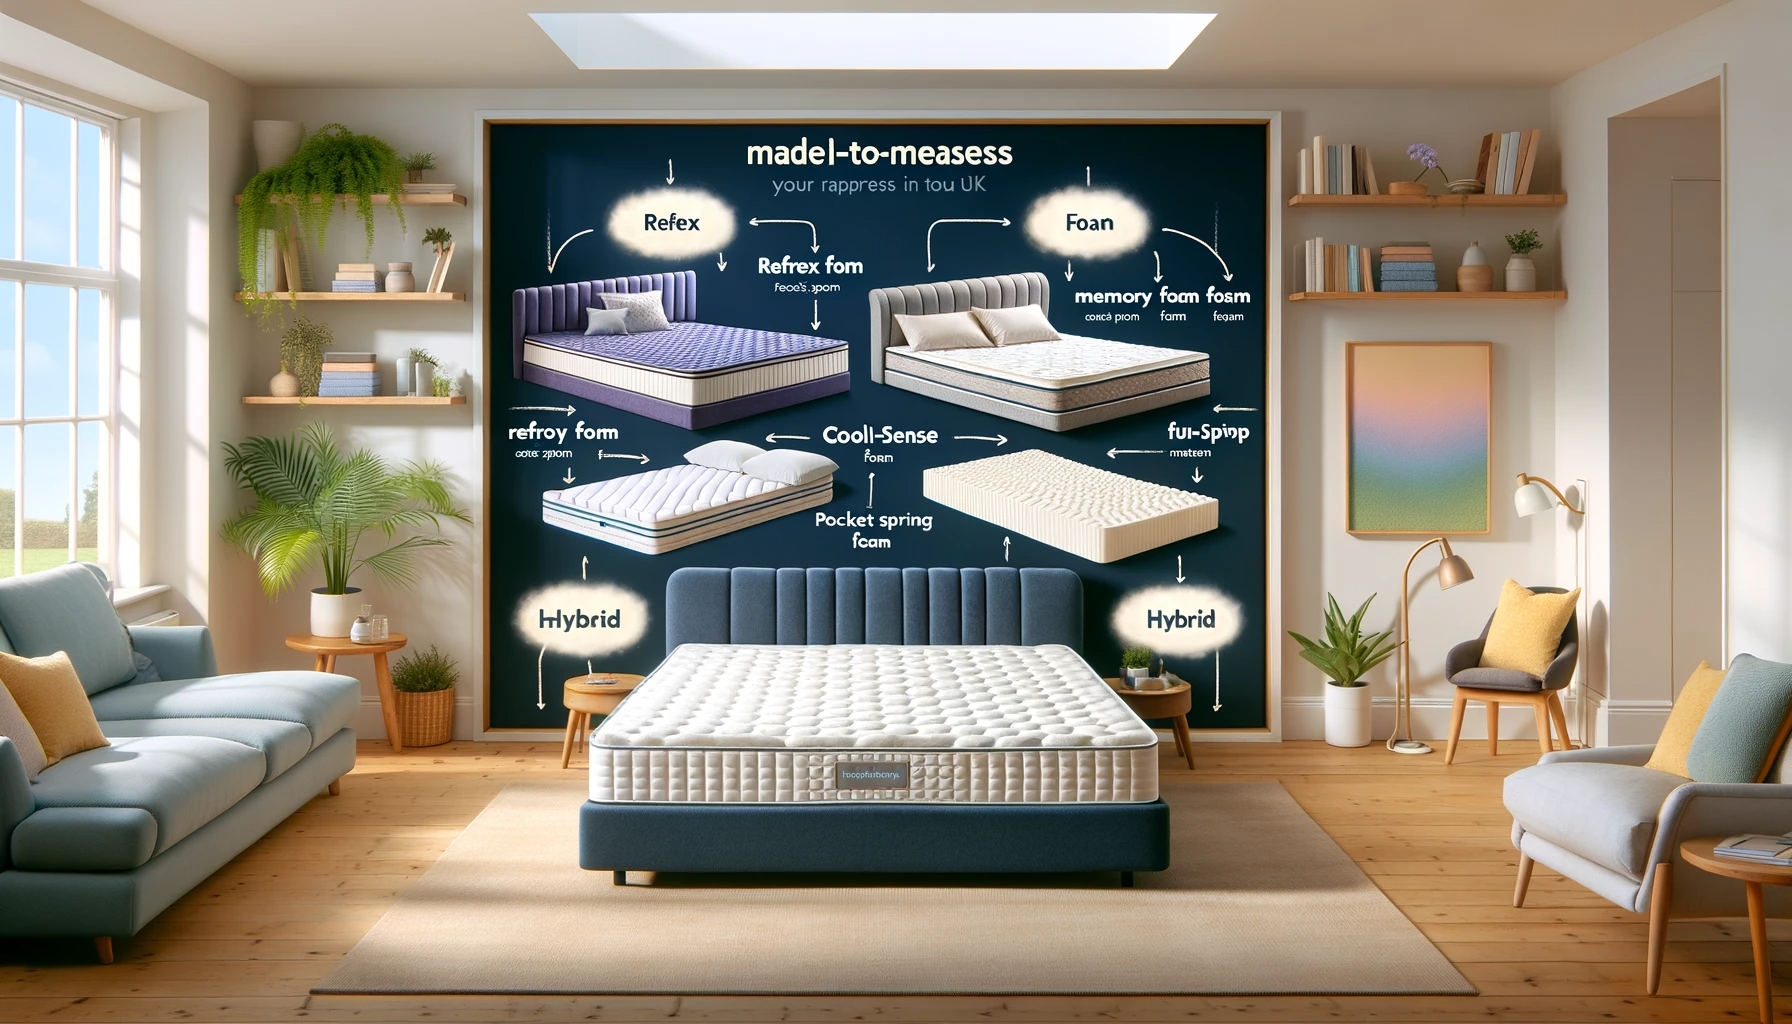 An informative visual displaying different types of made-to-measure mattresses, including Reflex foam, memory foam, CoolSense foam, pocket sprung, and hybrid mattresses.